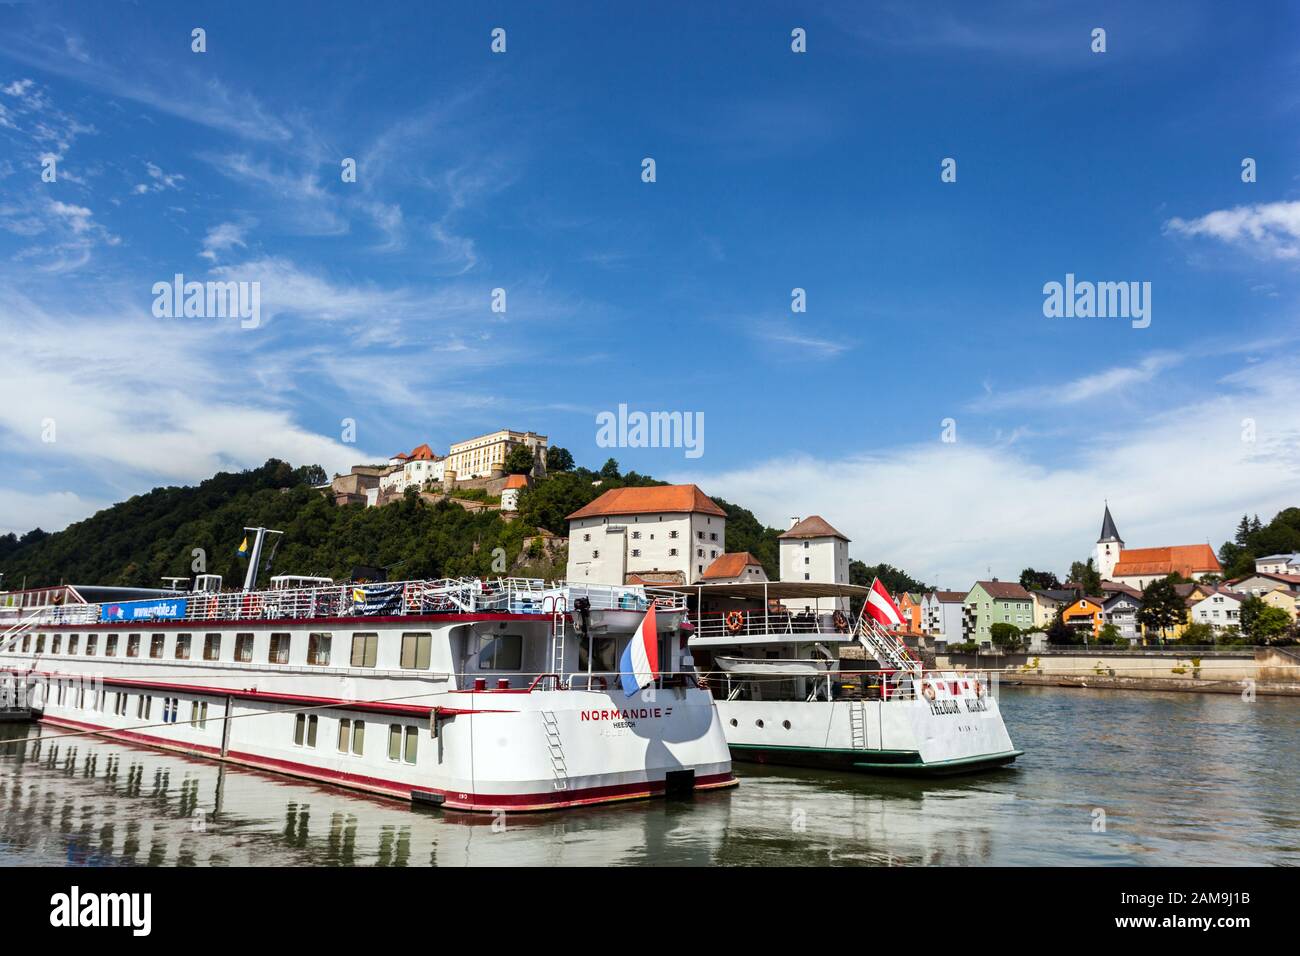 Excursion boats passau moored on the river, Passau Danube river Bavaria Germany Stock Photo